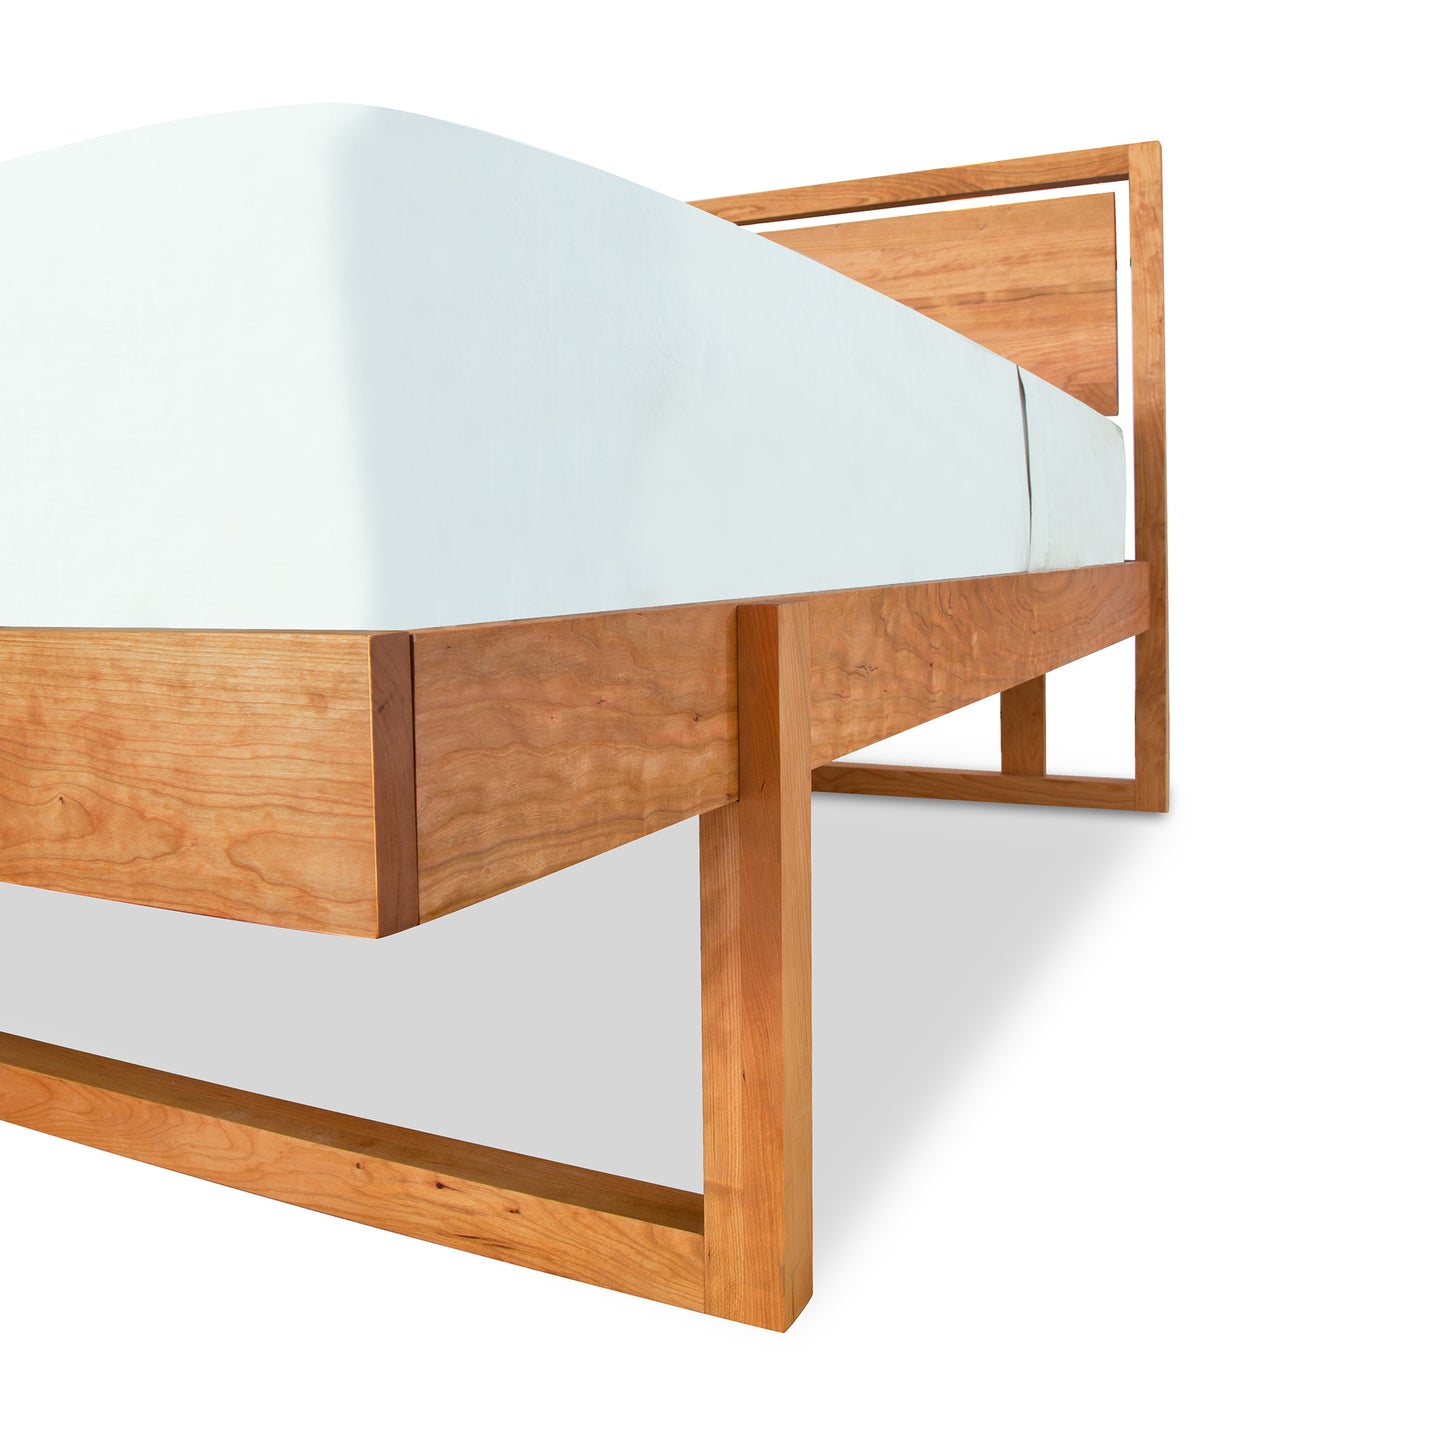 A sustainably harvested cherry wood Pendant Bed frame from Vermont Furniture Designs with a simple design, featuring a mattress with a light blue sheet on it, isolated on a white background.